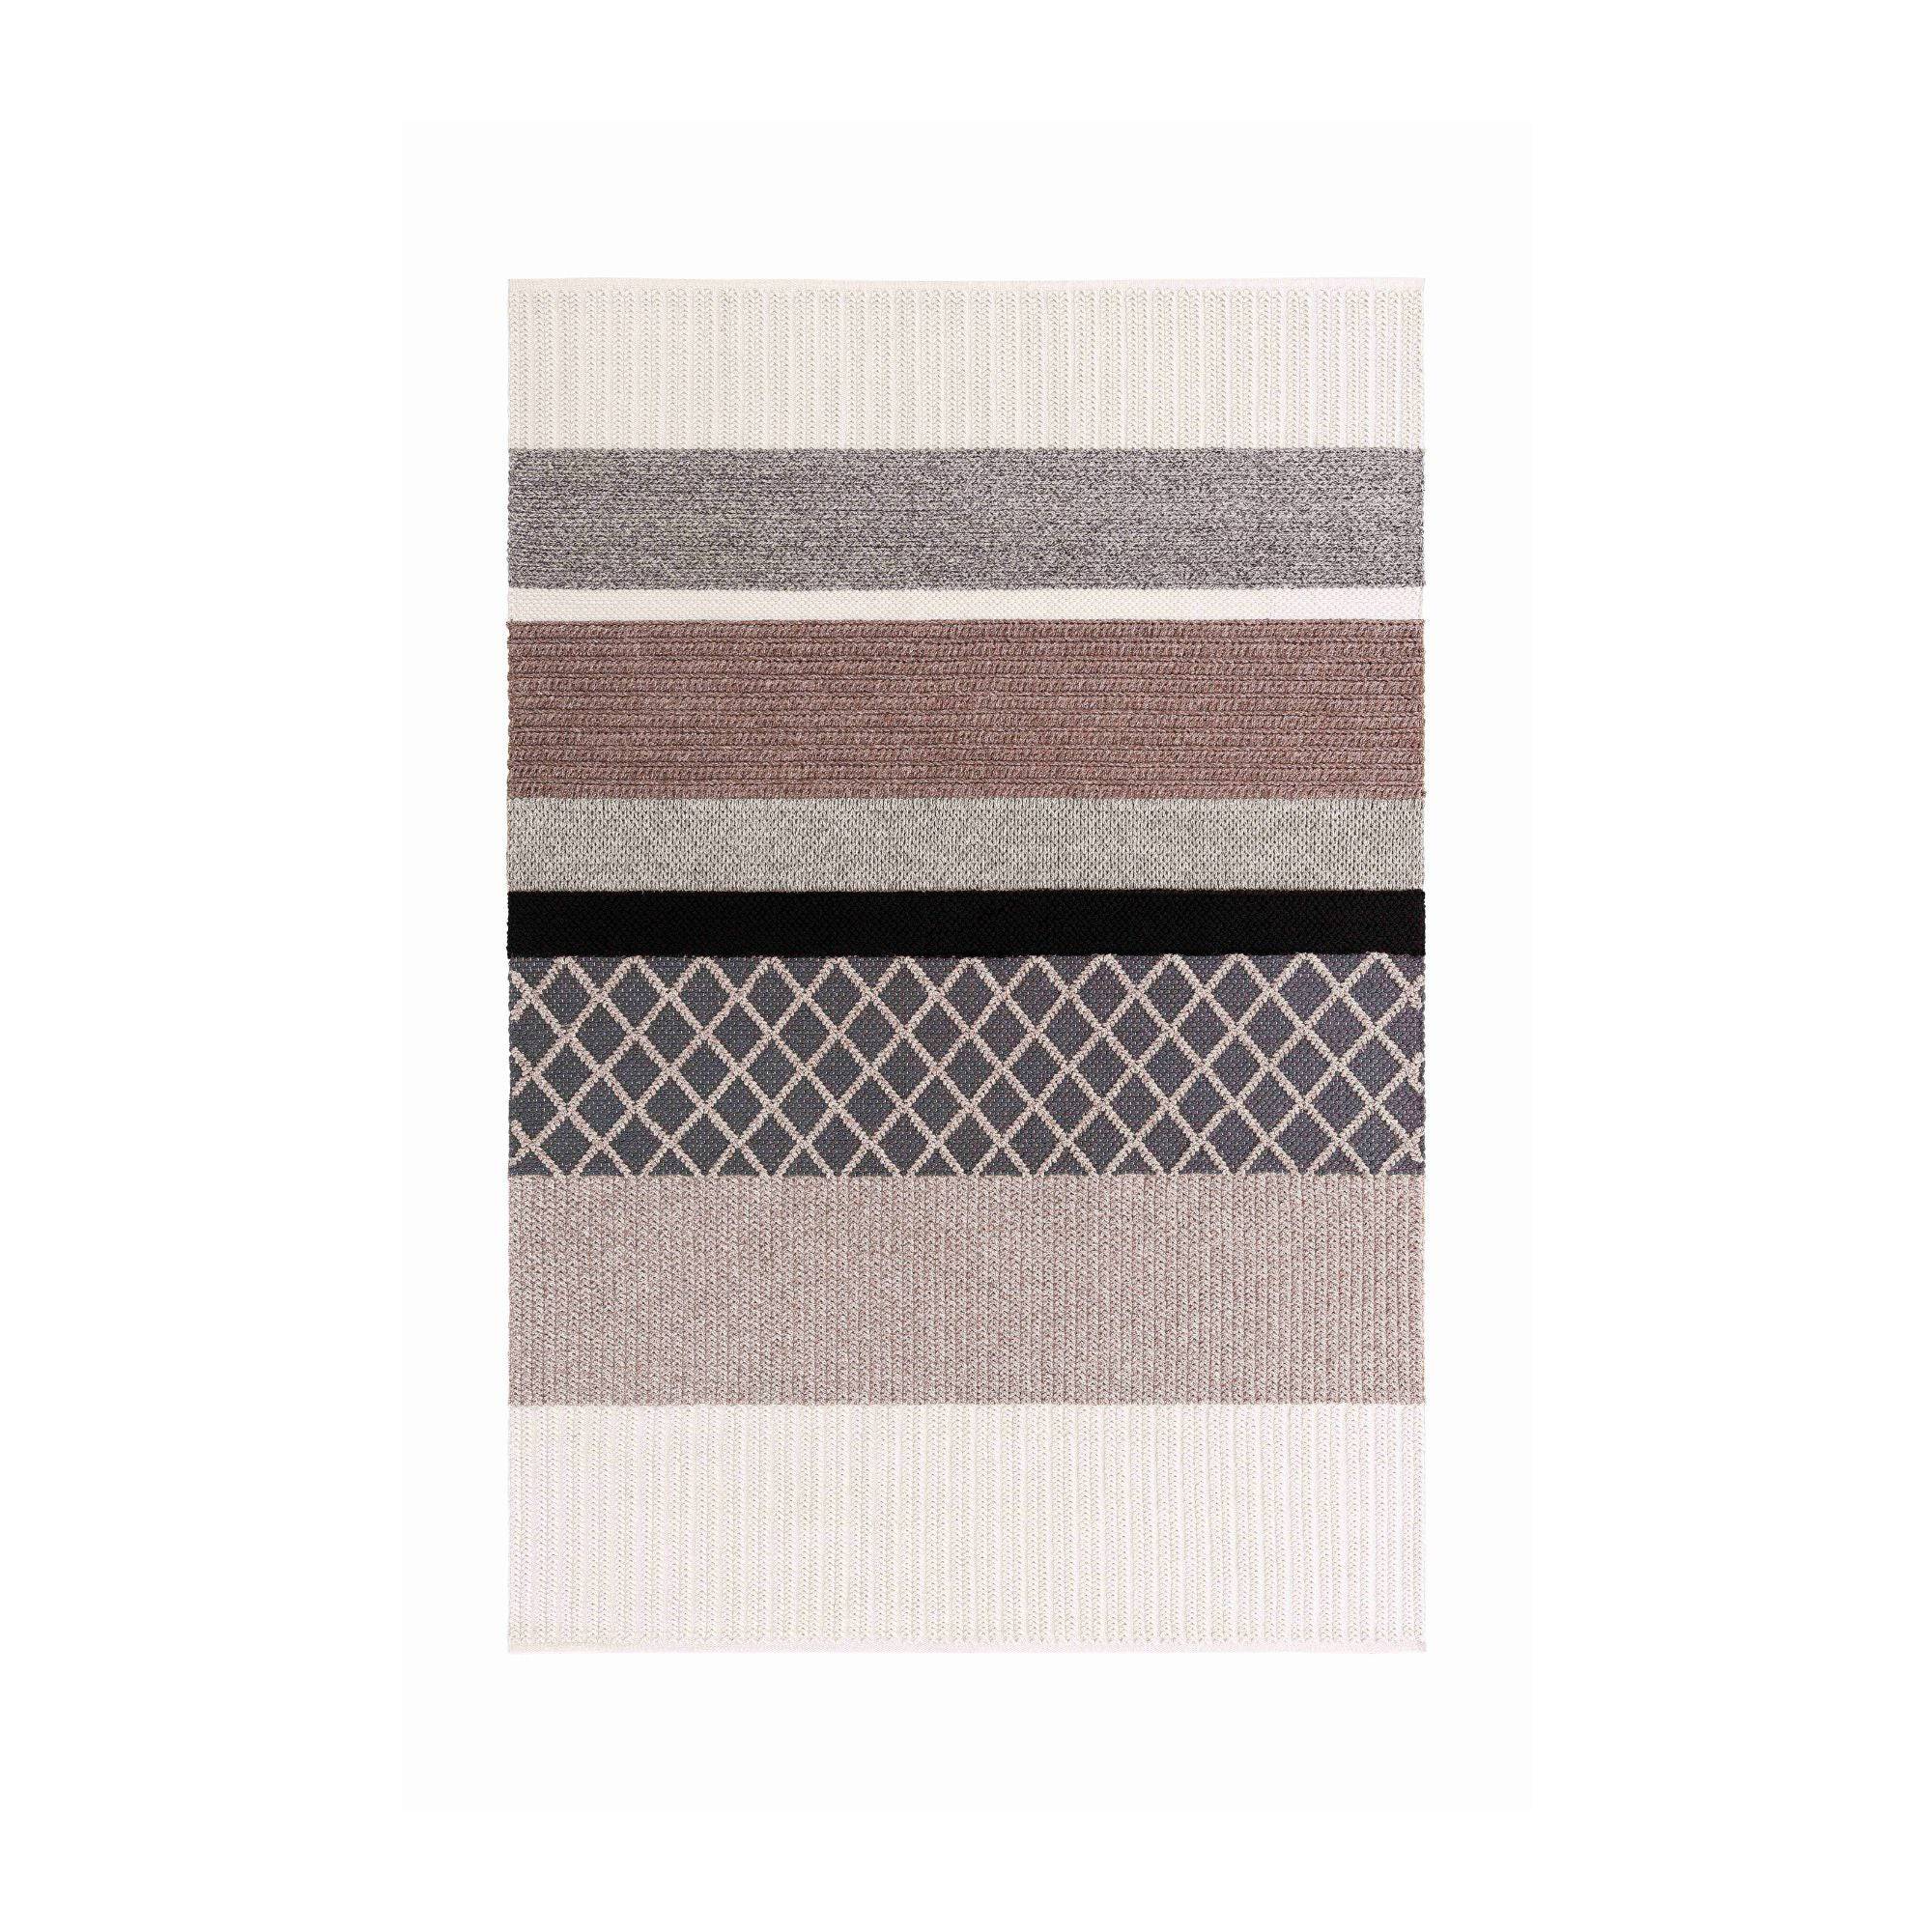 Mangas Outdoor Rug - Multicolor - THAT COOL LIVING